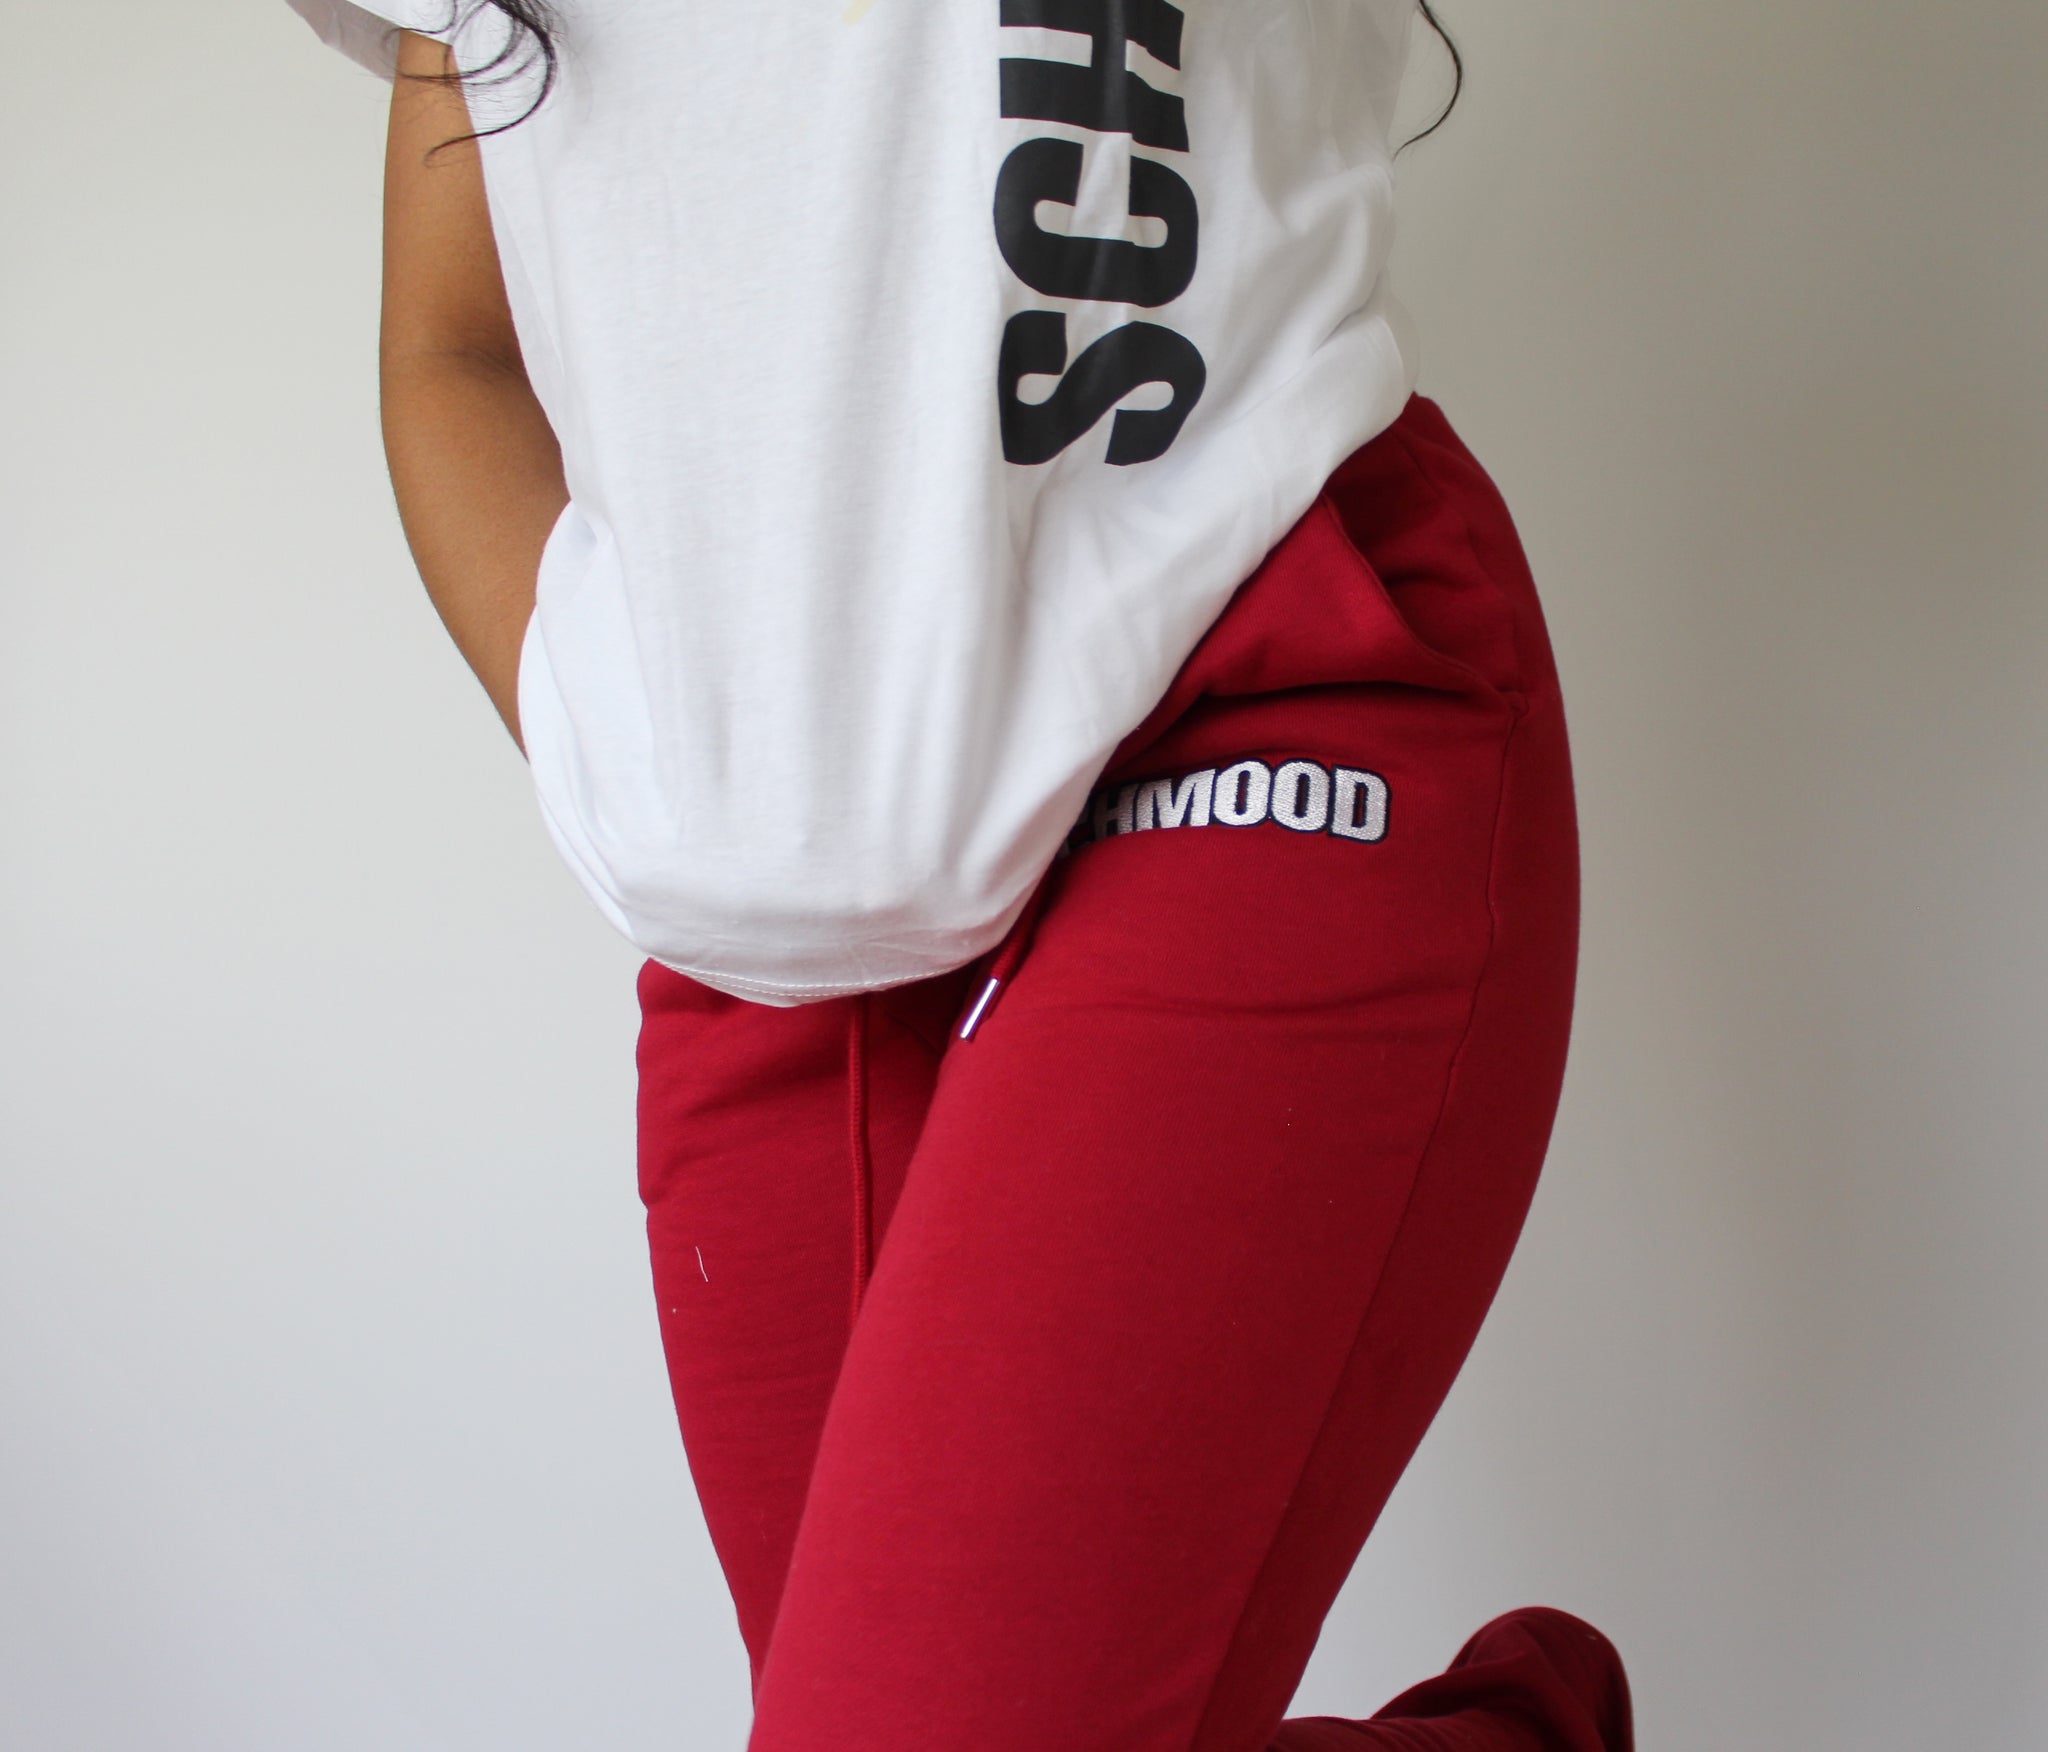 aesthetic red sweatpants outfit